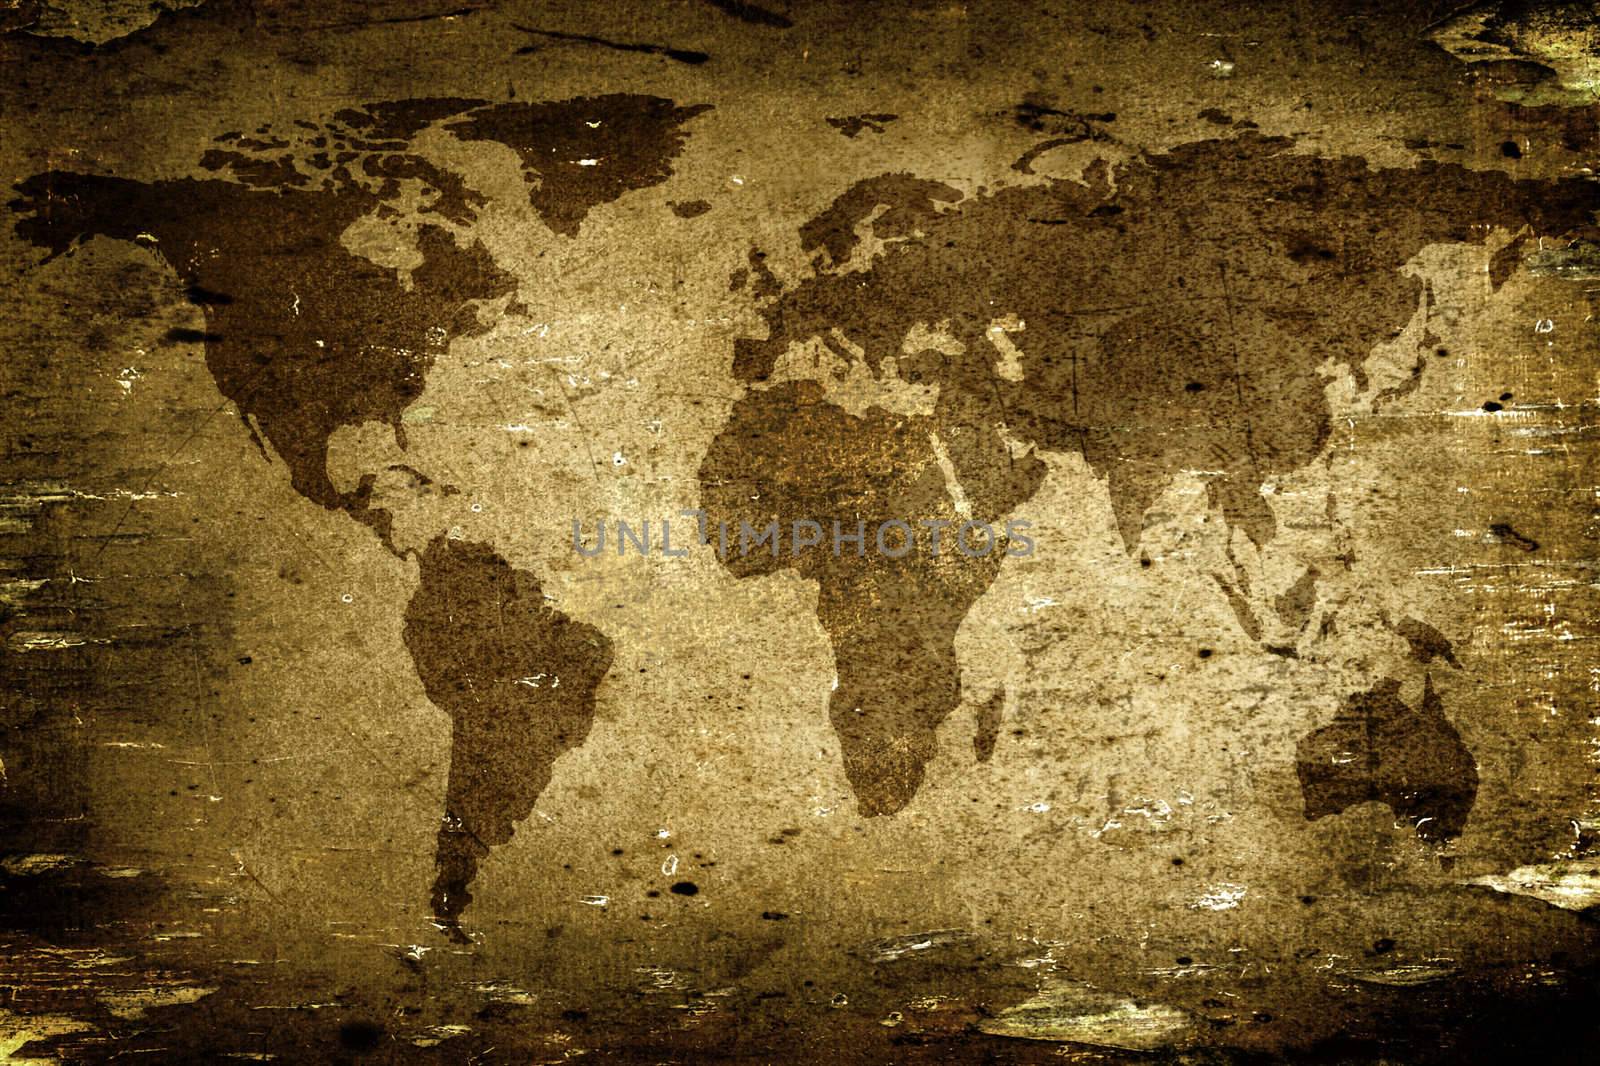 Background made with old textured paper with a world map 
- Map traced from the Nasa Website
(http://earthobservatory.nasa.gov)